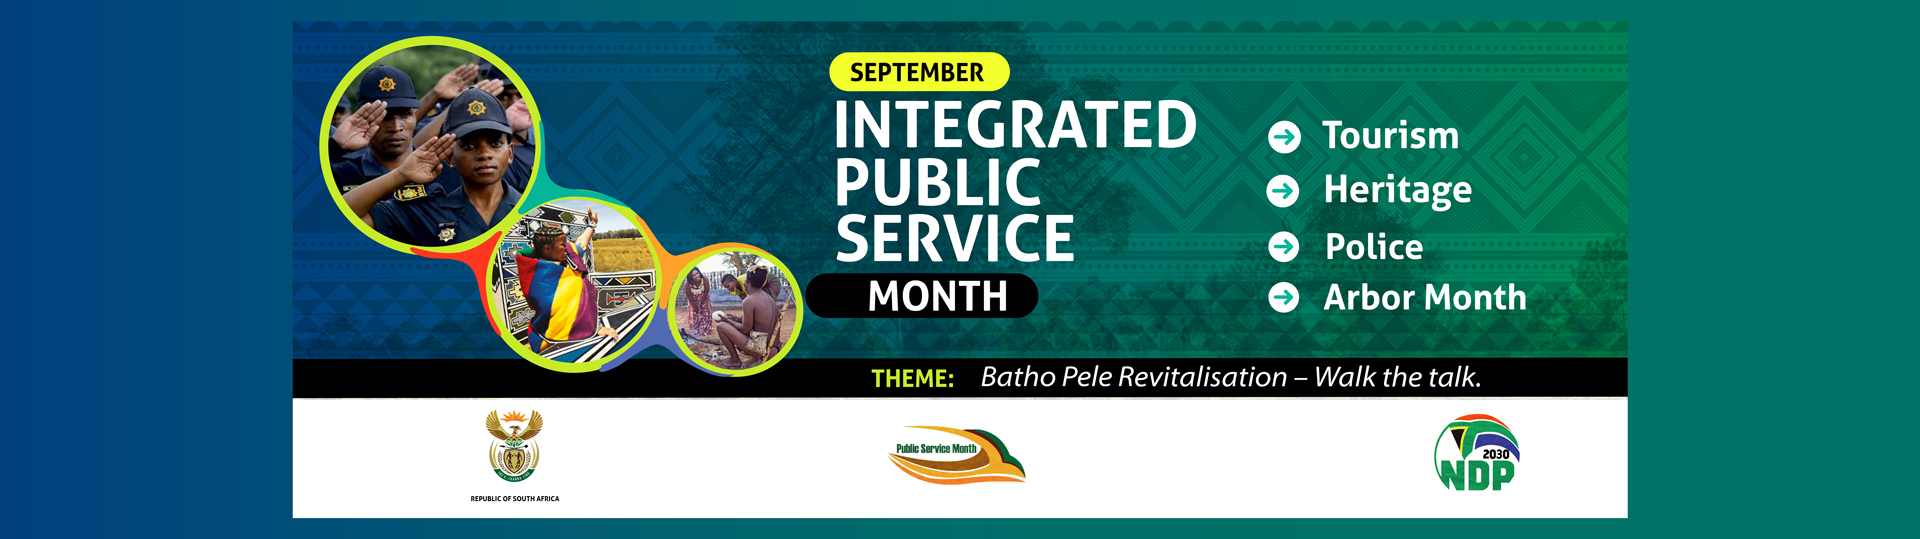 Integrated Public Service Month